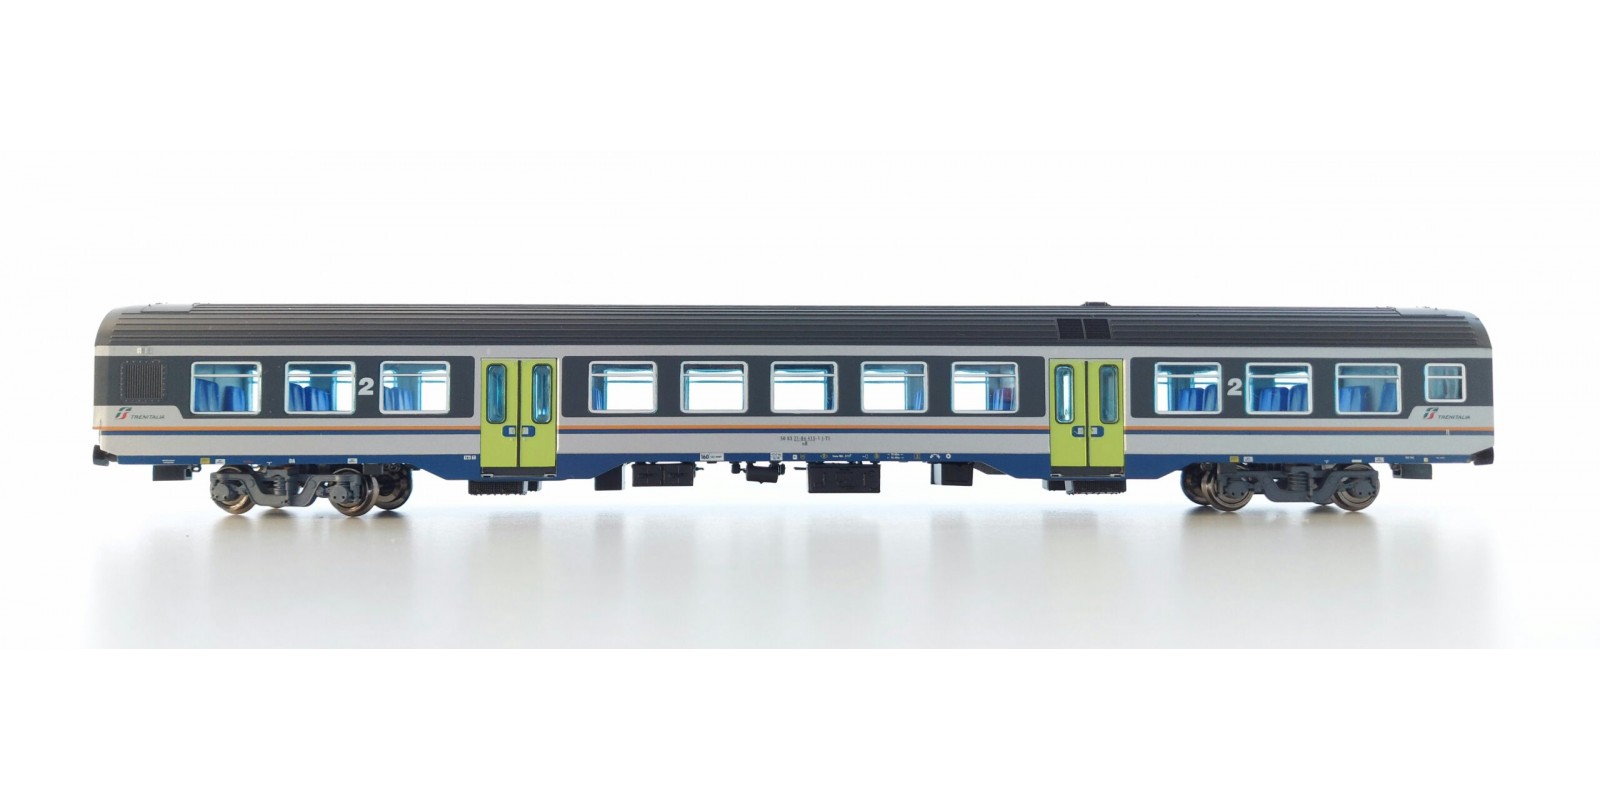 ViT3198 2nd class MDVC carriage in DTR livery with interior lighting